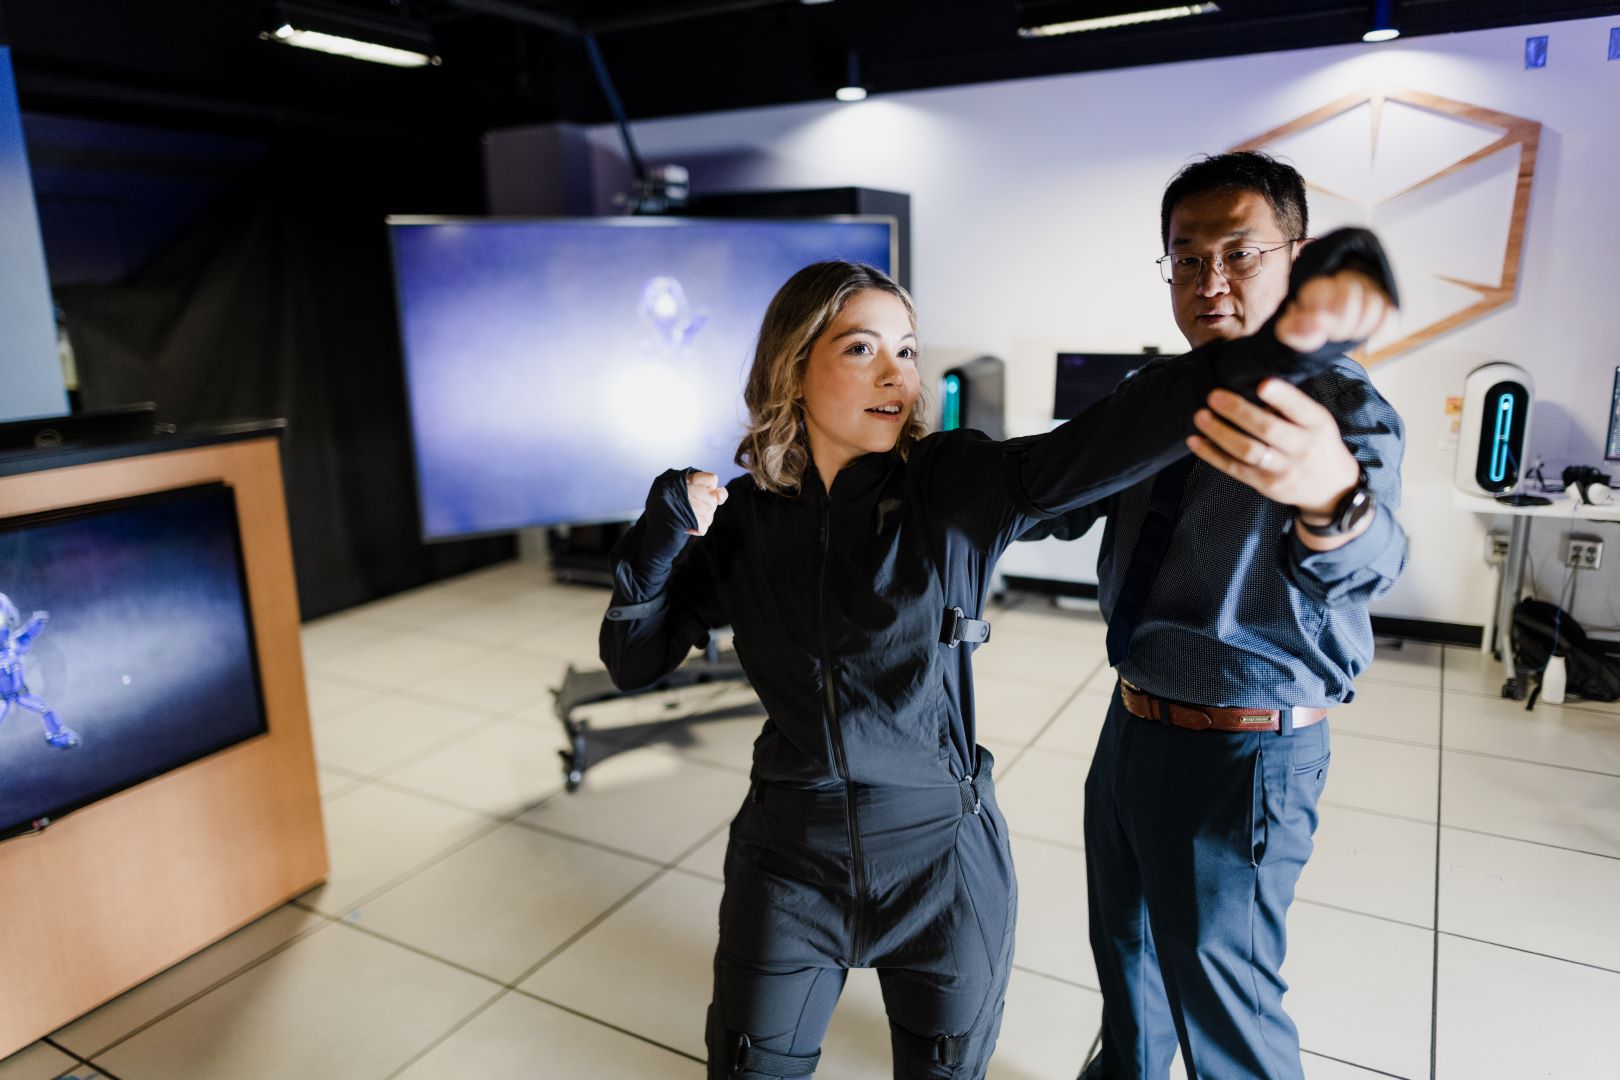 A woman in a jumpsuit punches the air guided by a man standing next to her with computer screens behind them.